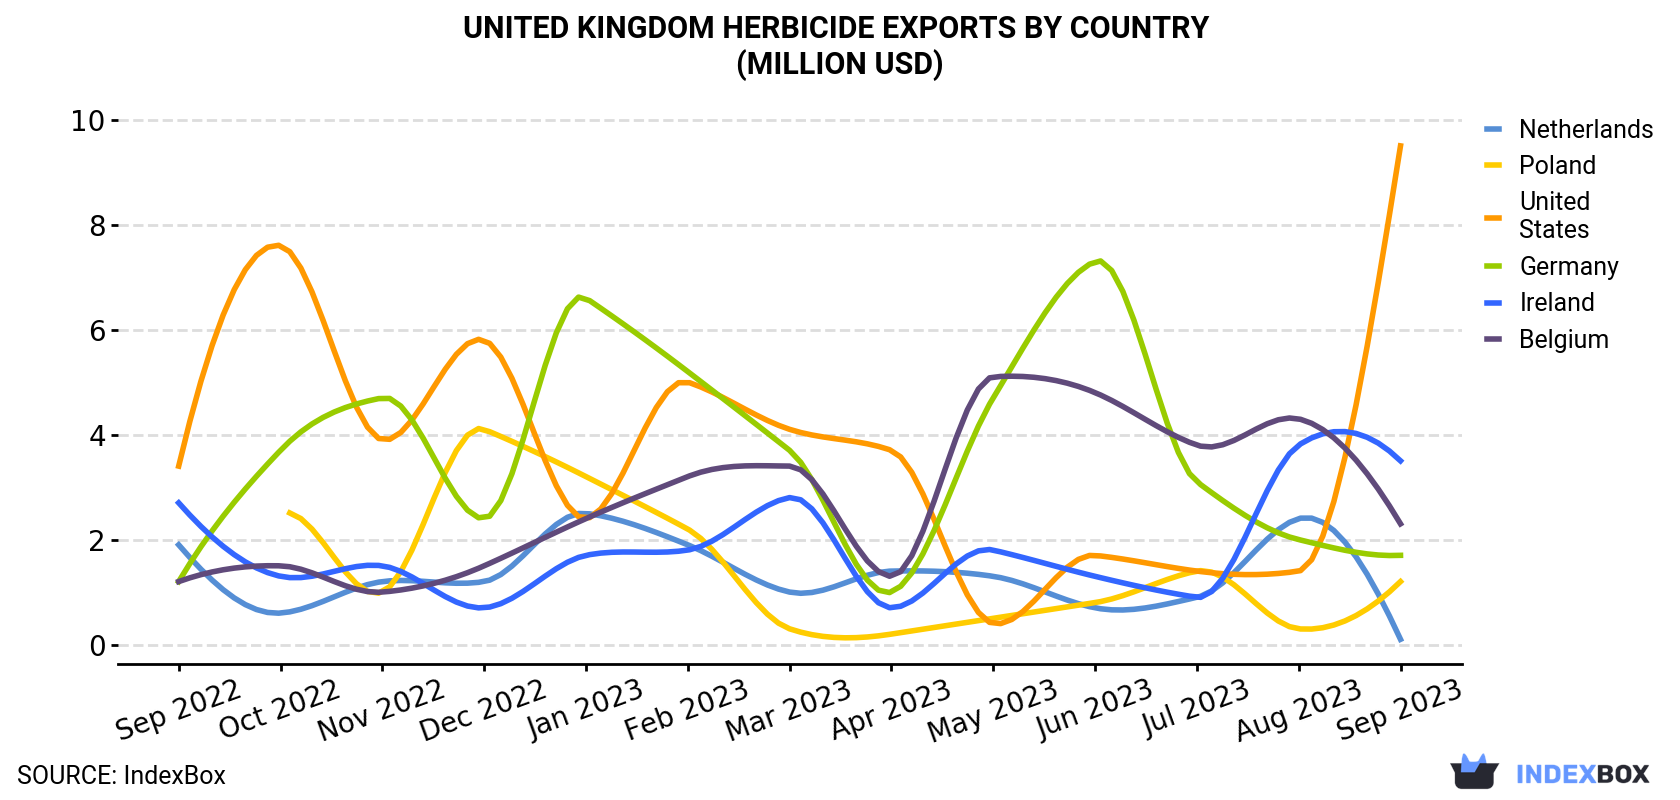 United Kingdom Herbicide Exports By Country (Million USD)